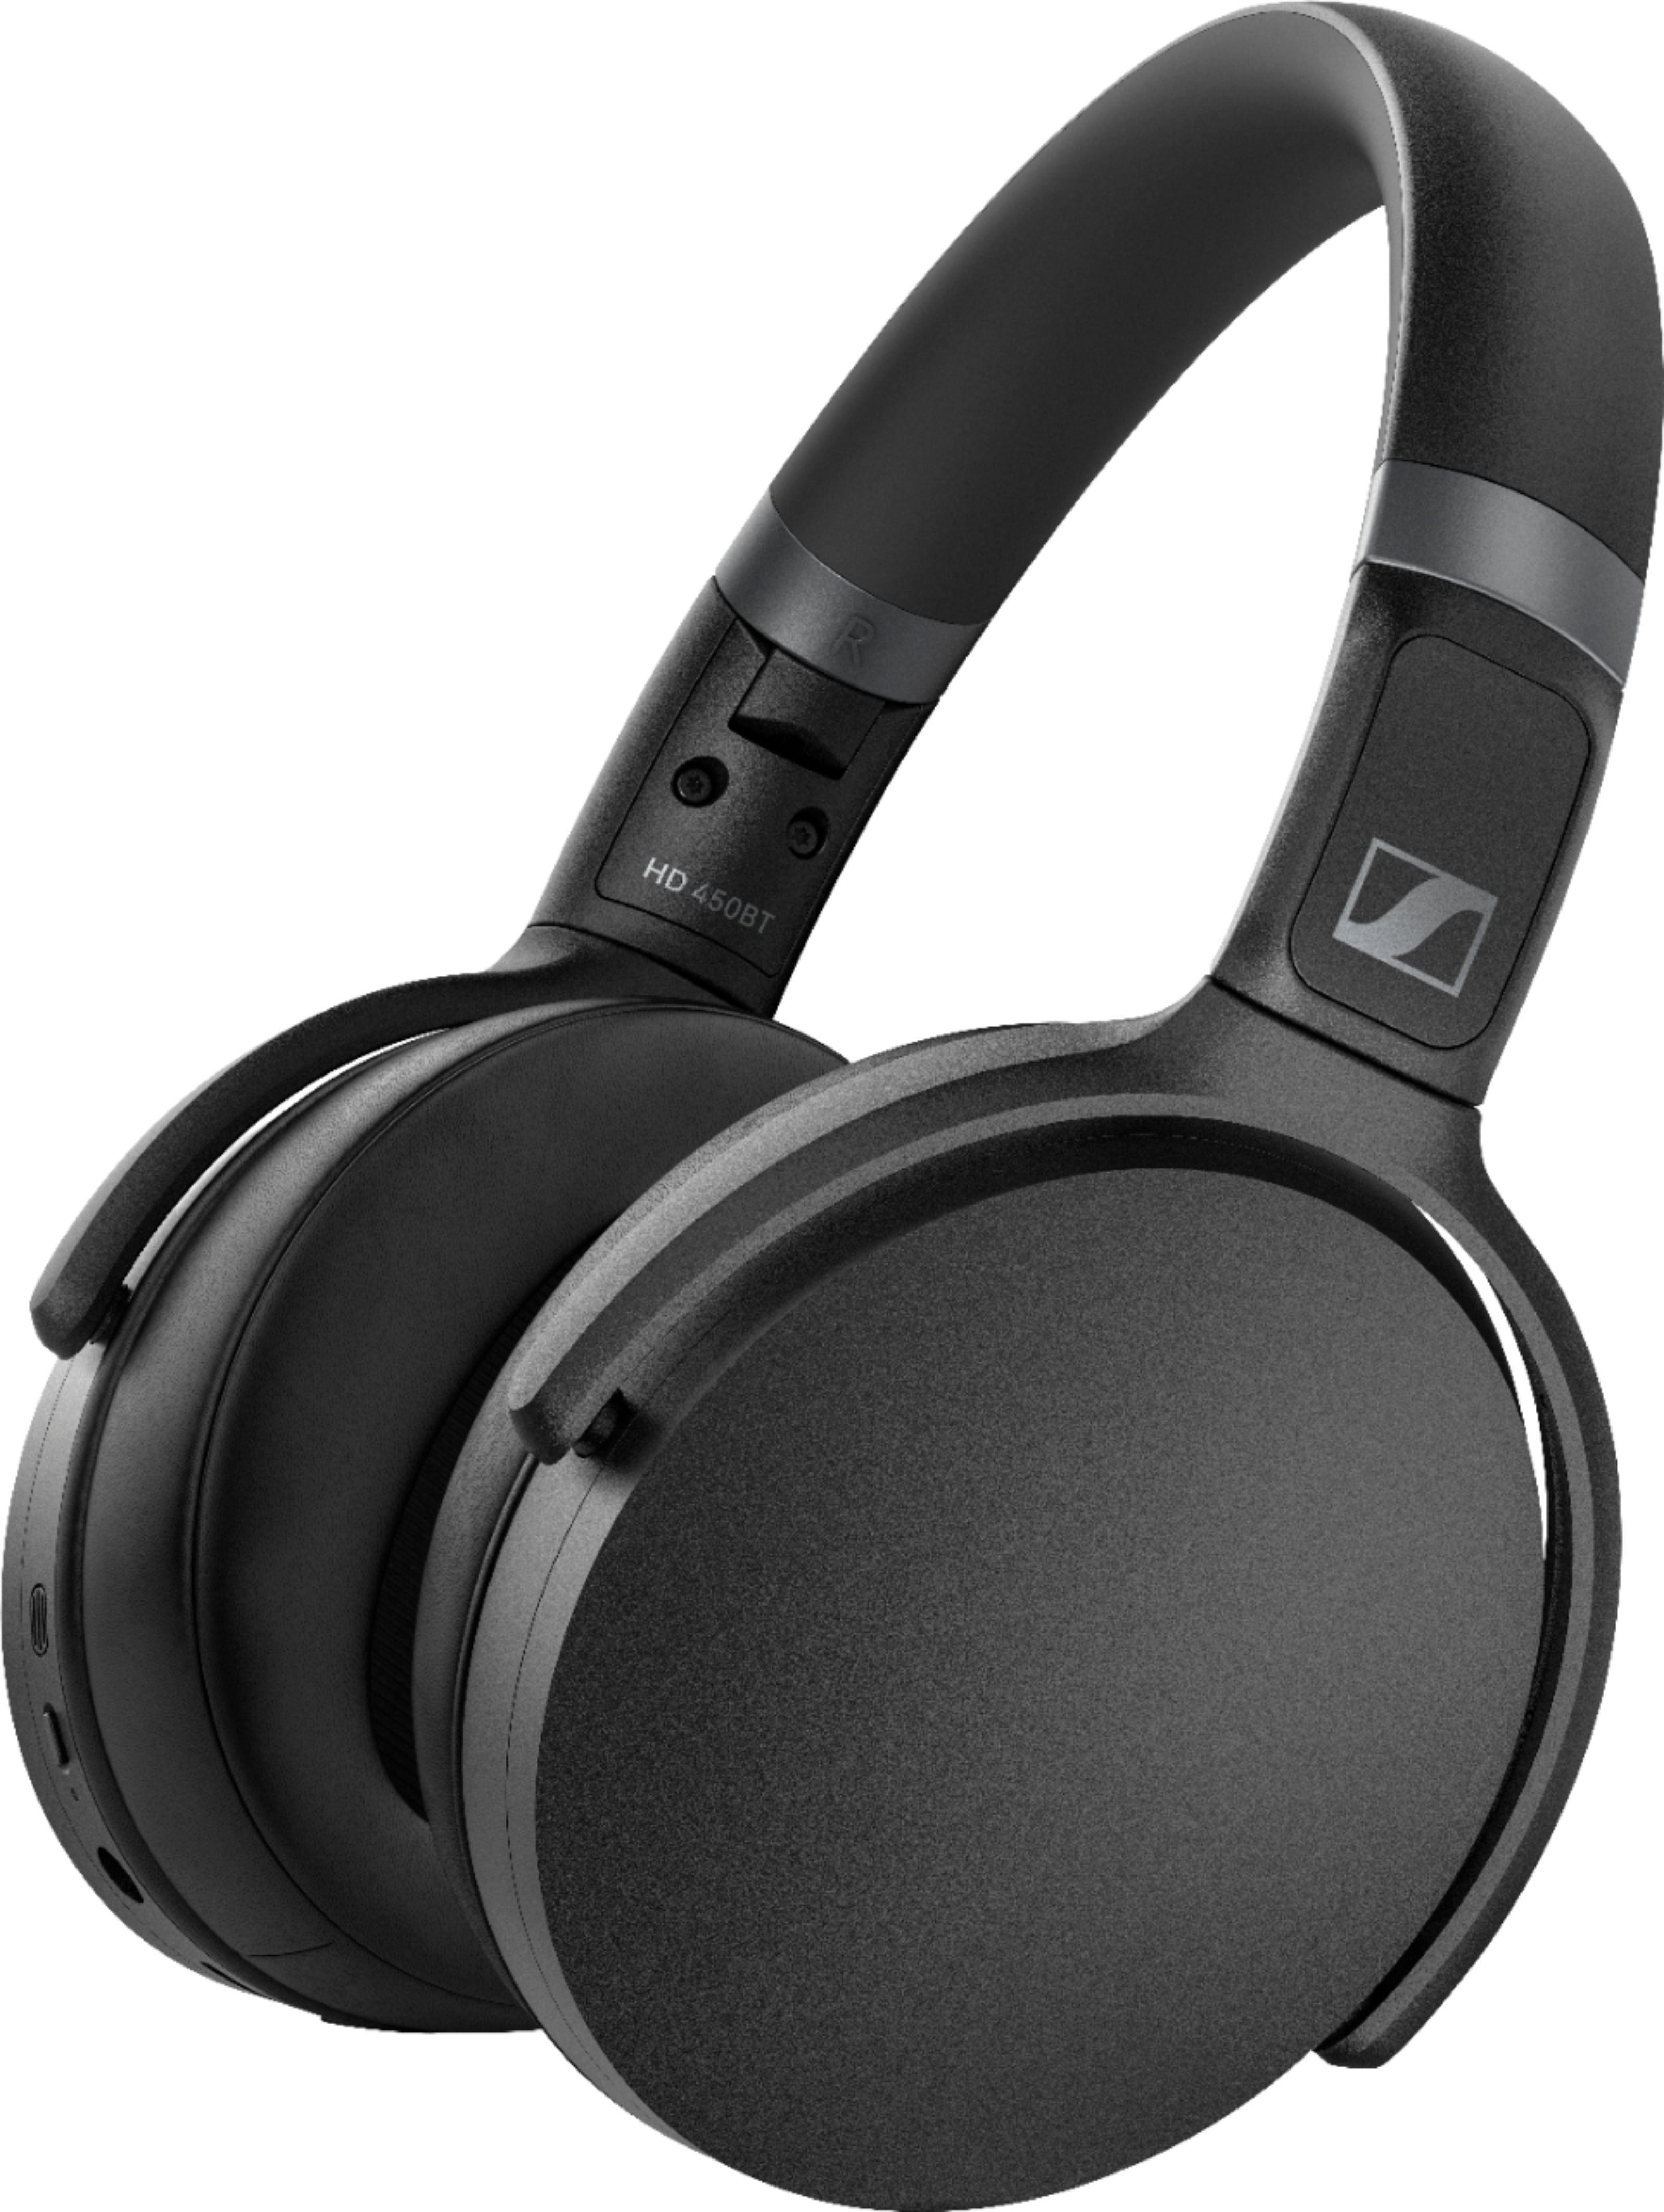 Angle View: Sennheiser - HD 450BT Wireless Noise Cancelling Over-the-Ear Headphones - Black